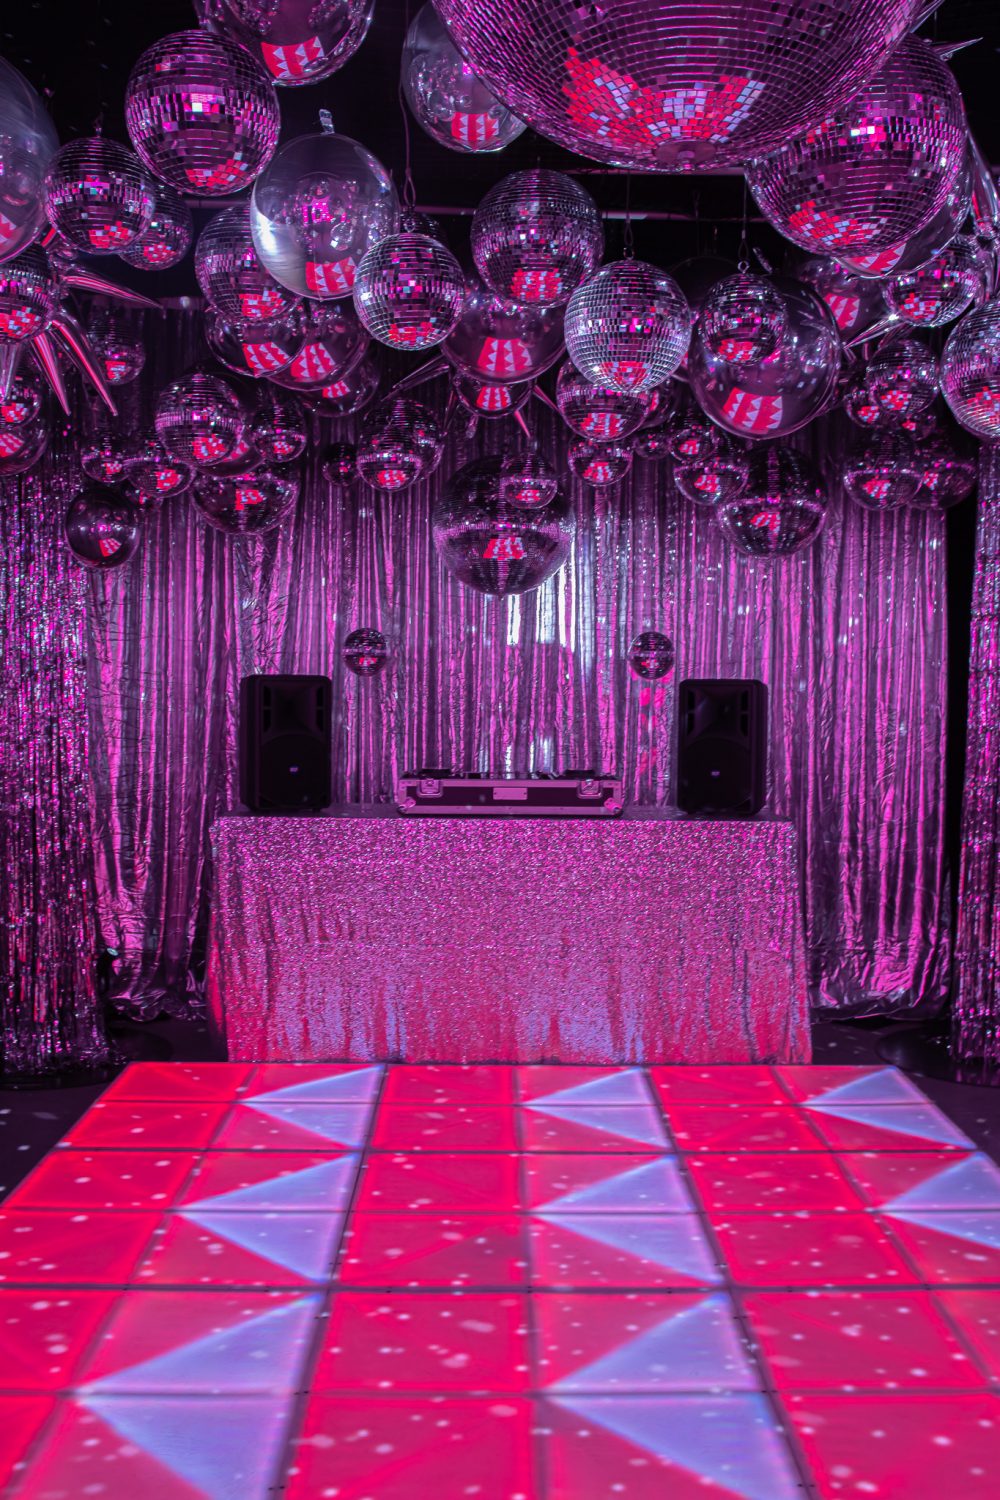 70s silver disco theme led dance floor, dj booth, and silver mirror balls